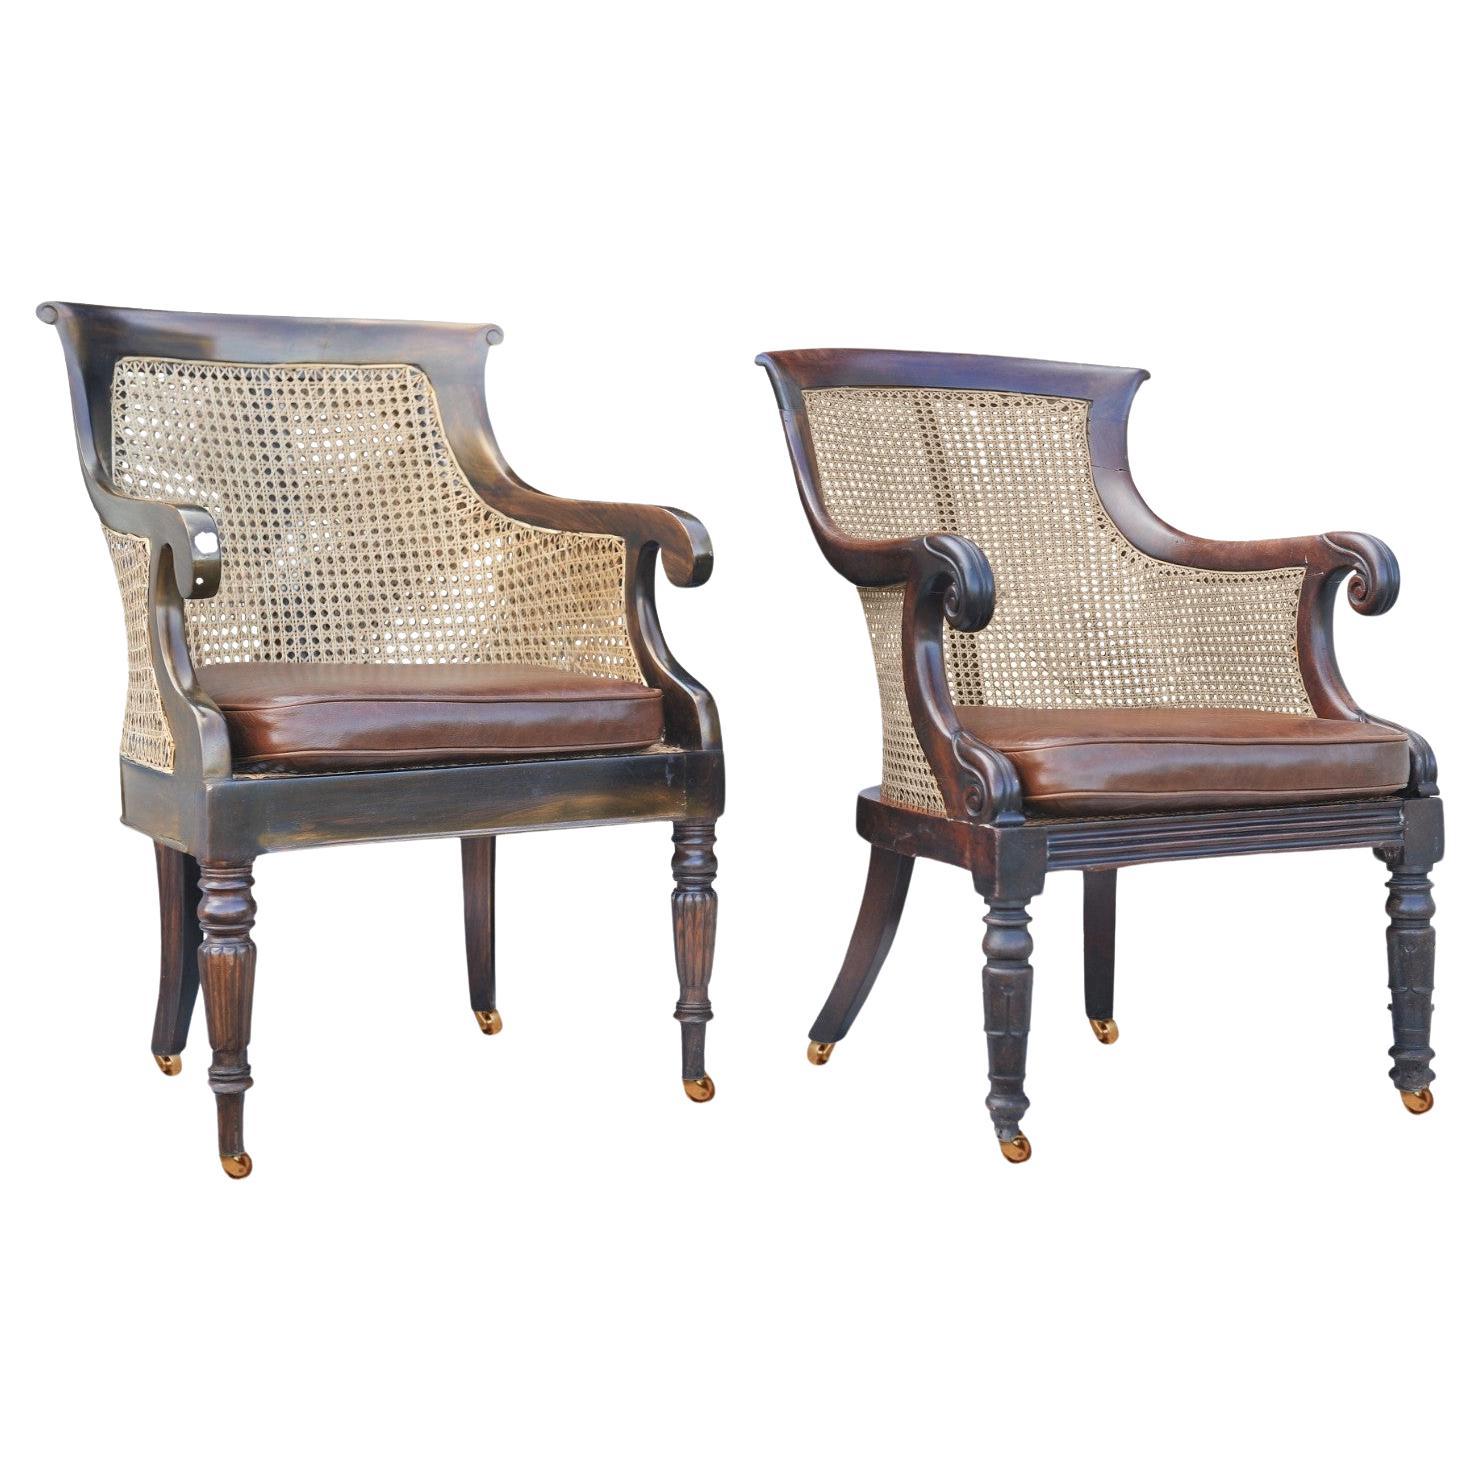 An Elegant Pair of William IV Regency Hardwood Cane Bergere & Antique Brown Leather Library Armchairs With Scrolled Arms on Brass Castors

Chairs are a near pair slightly differing But Not Matching

Cane is in good condition, please note images have